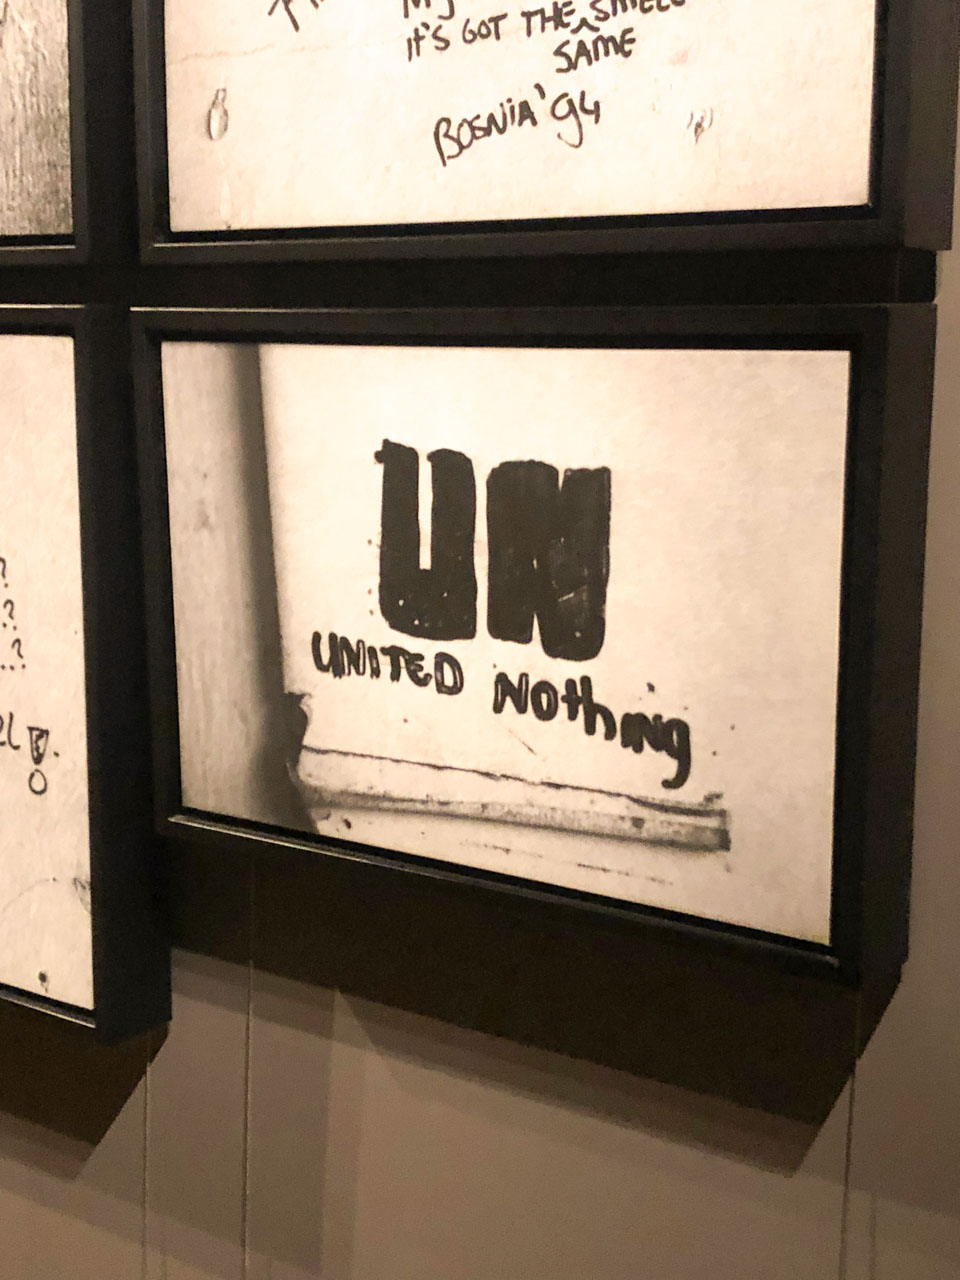 A sign that says "UN United Nothing"